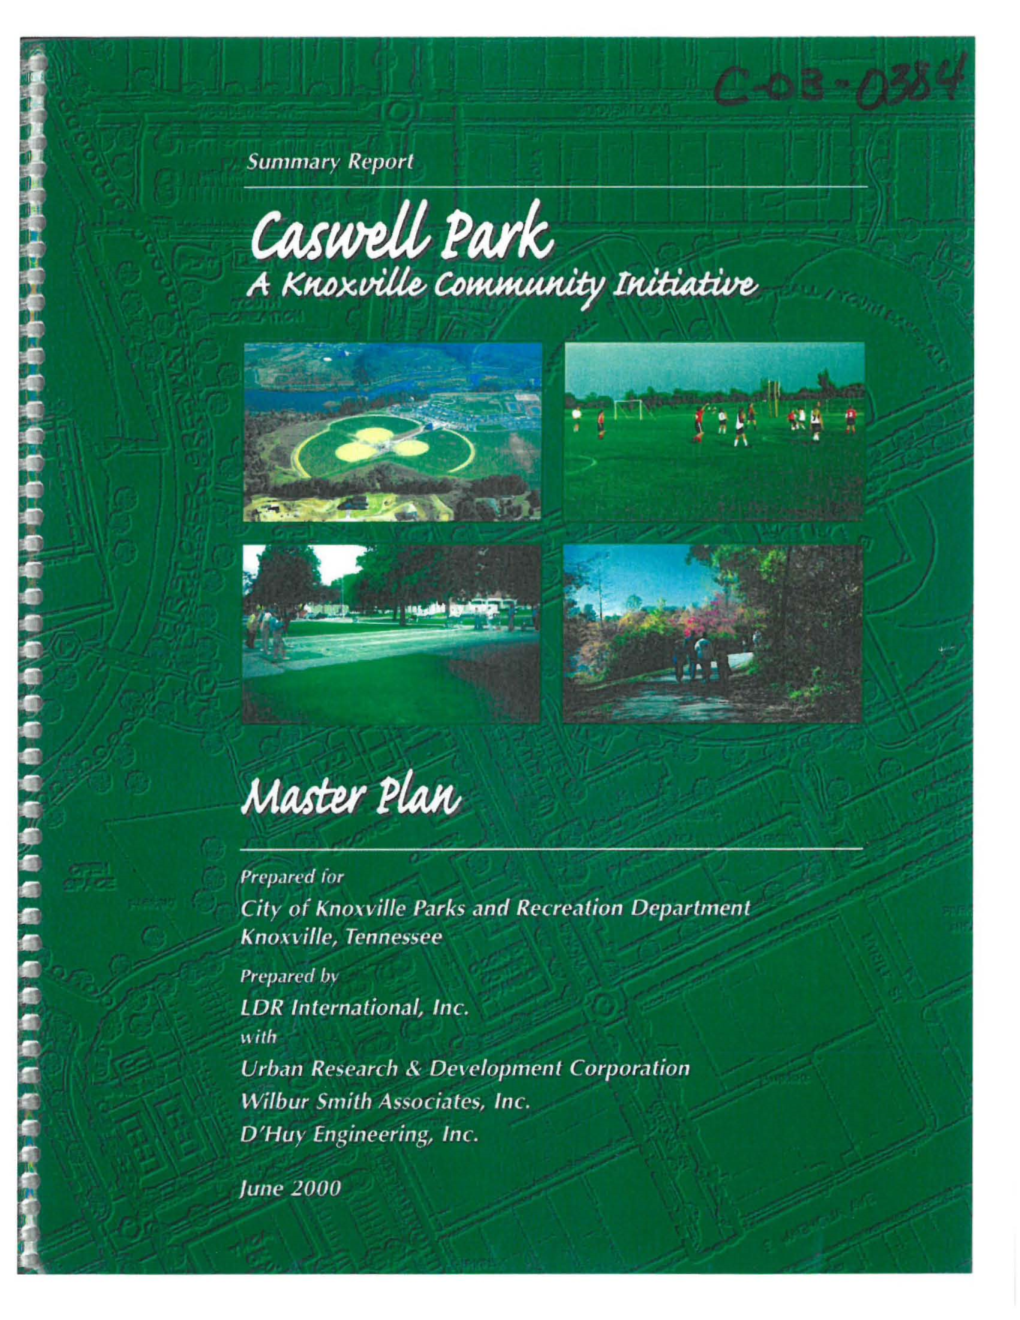 Caswell Park Master Plan , Including Phasing, Cost Estimates, Marketing, and Next Steps